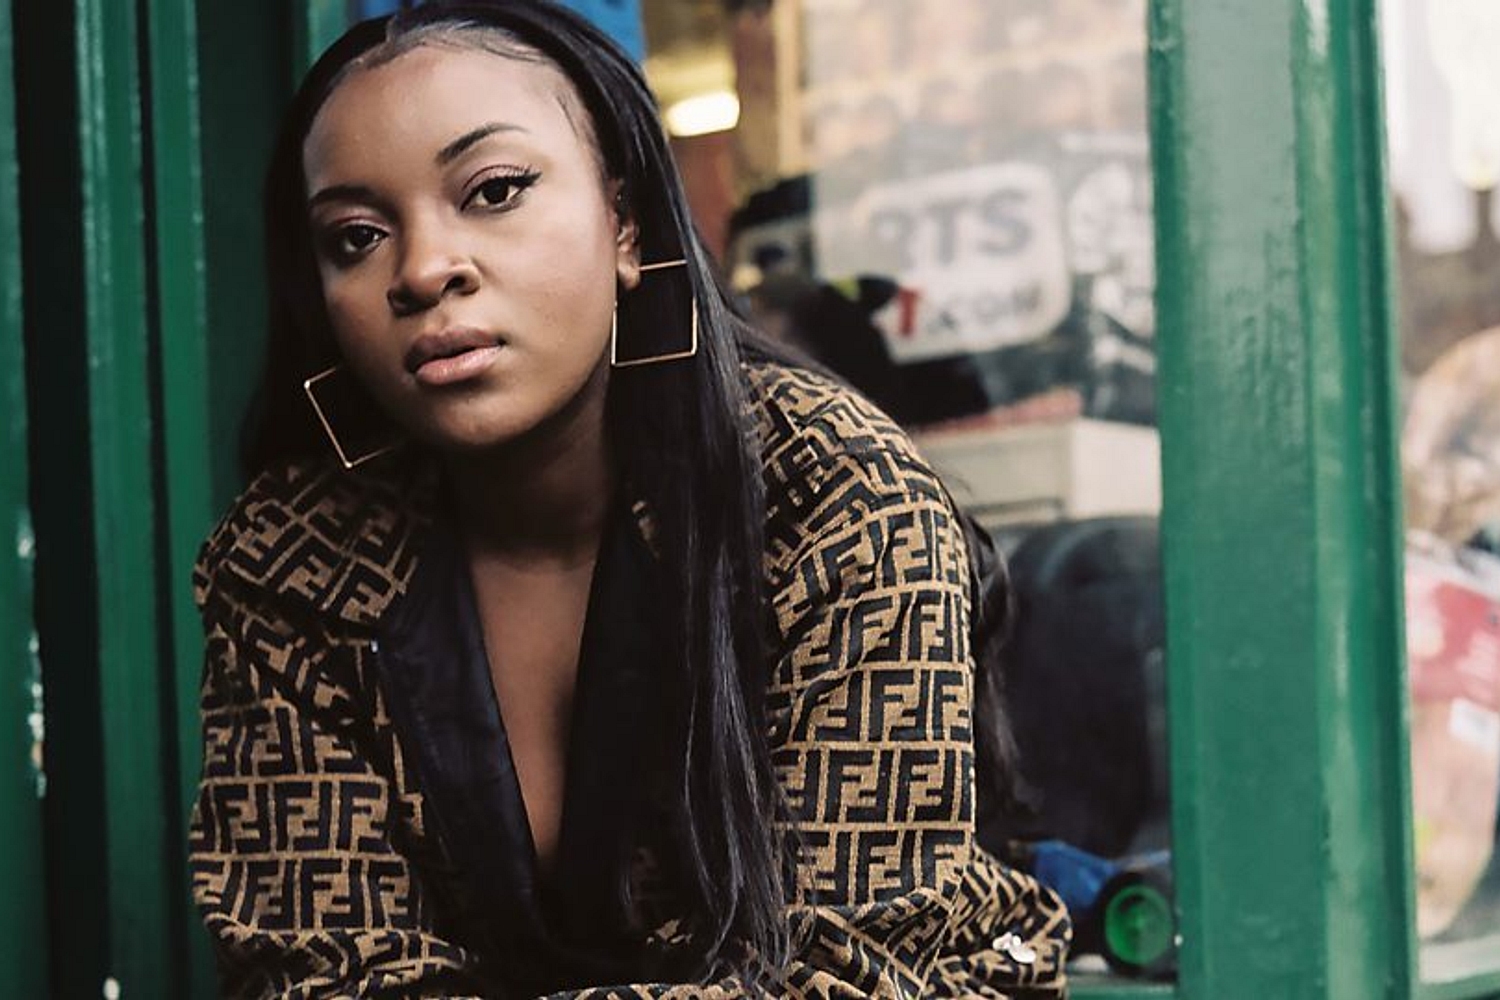 Ray BLK wins the BBC Sound of 2017